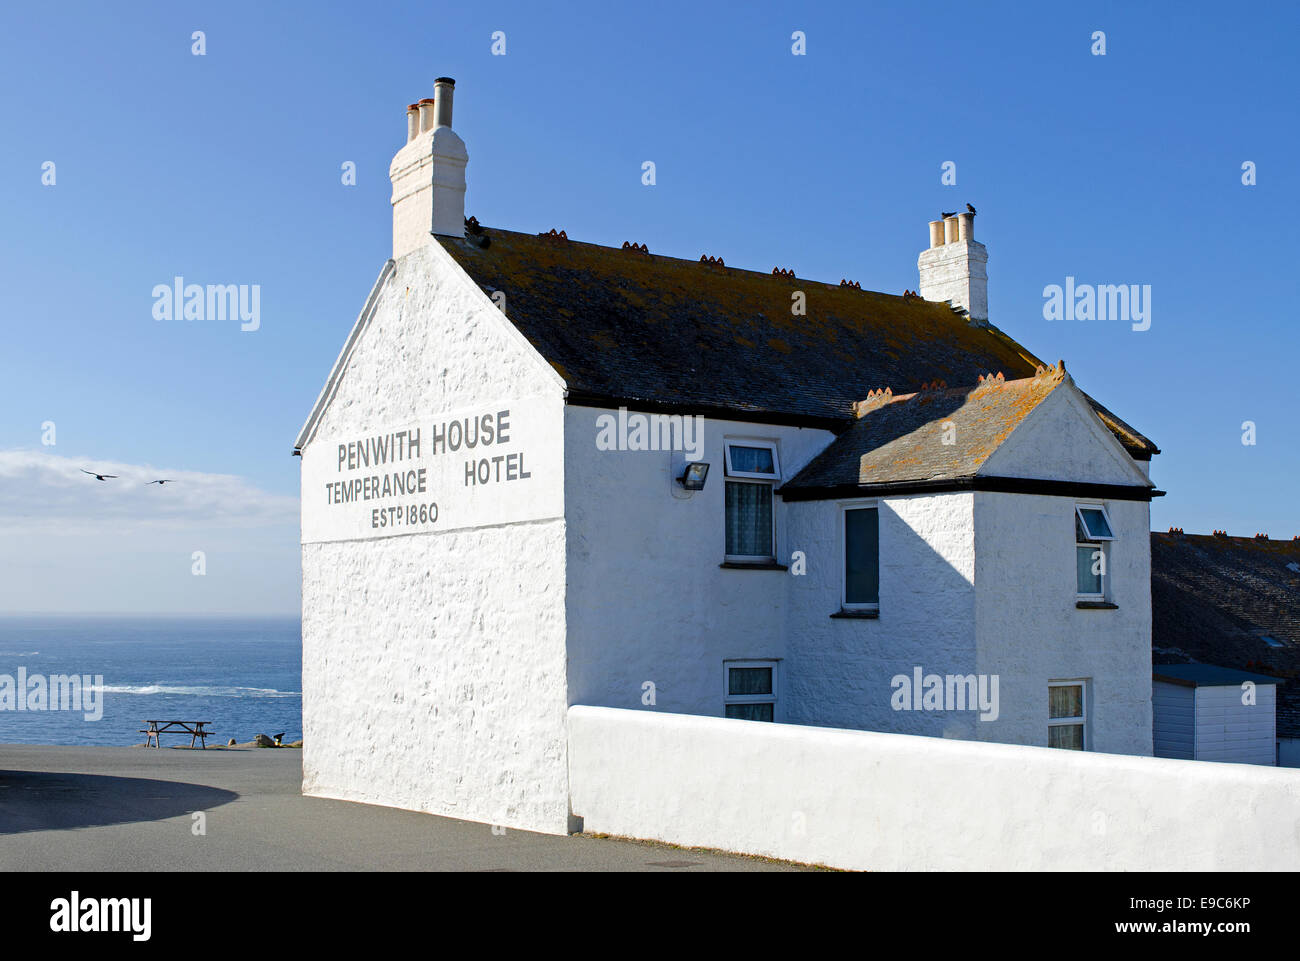 Penwith House, Temprance hotel a Lands End in Cornwall, Regno Unito Foto Stock